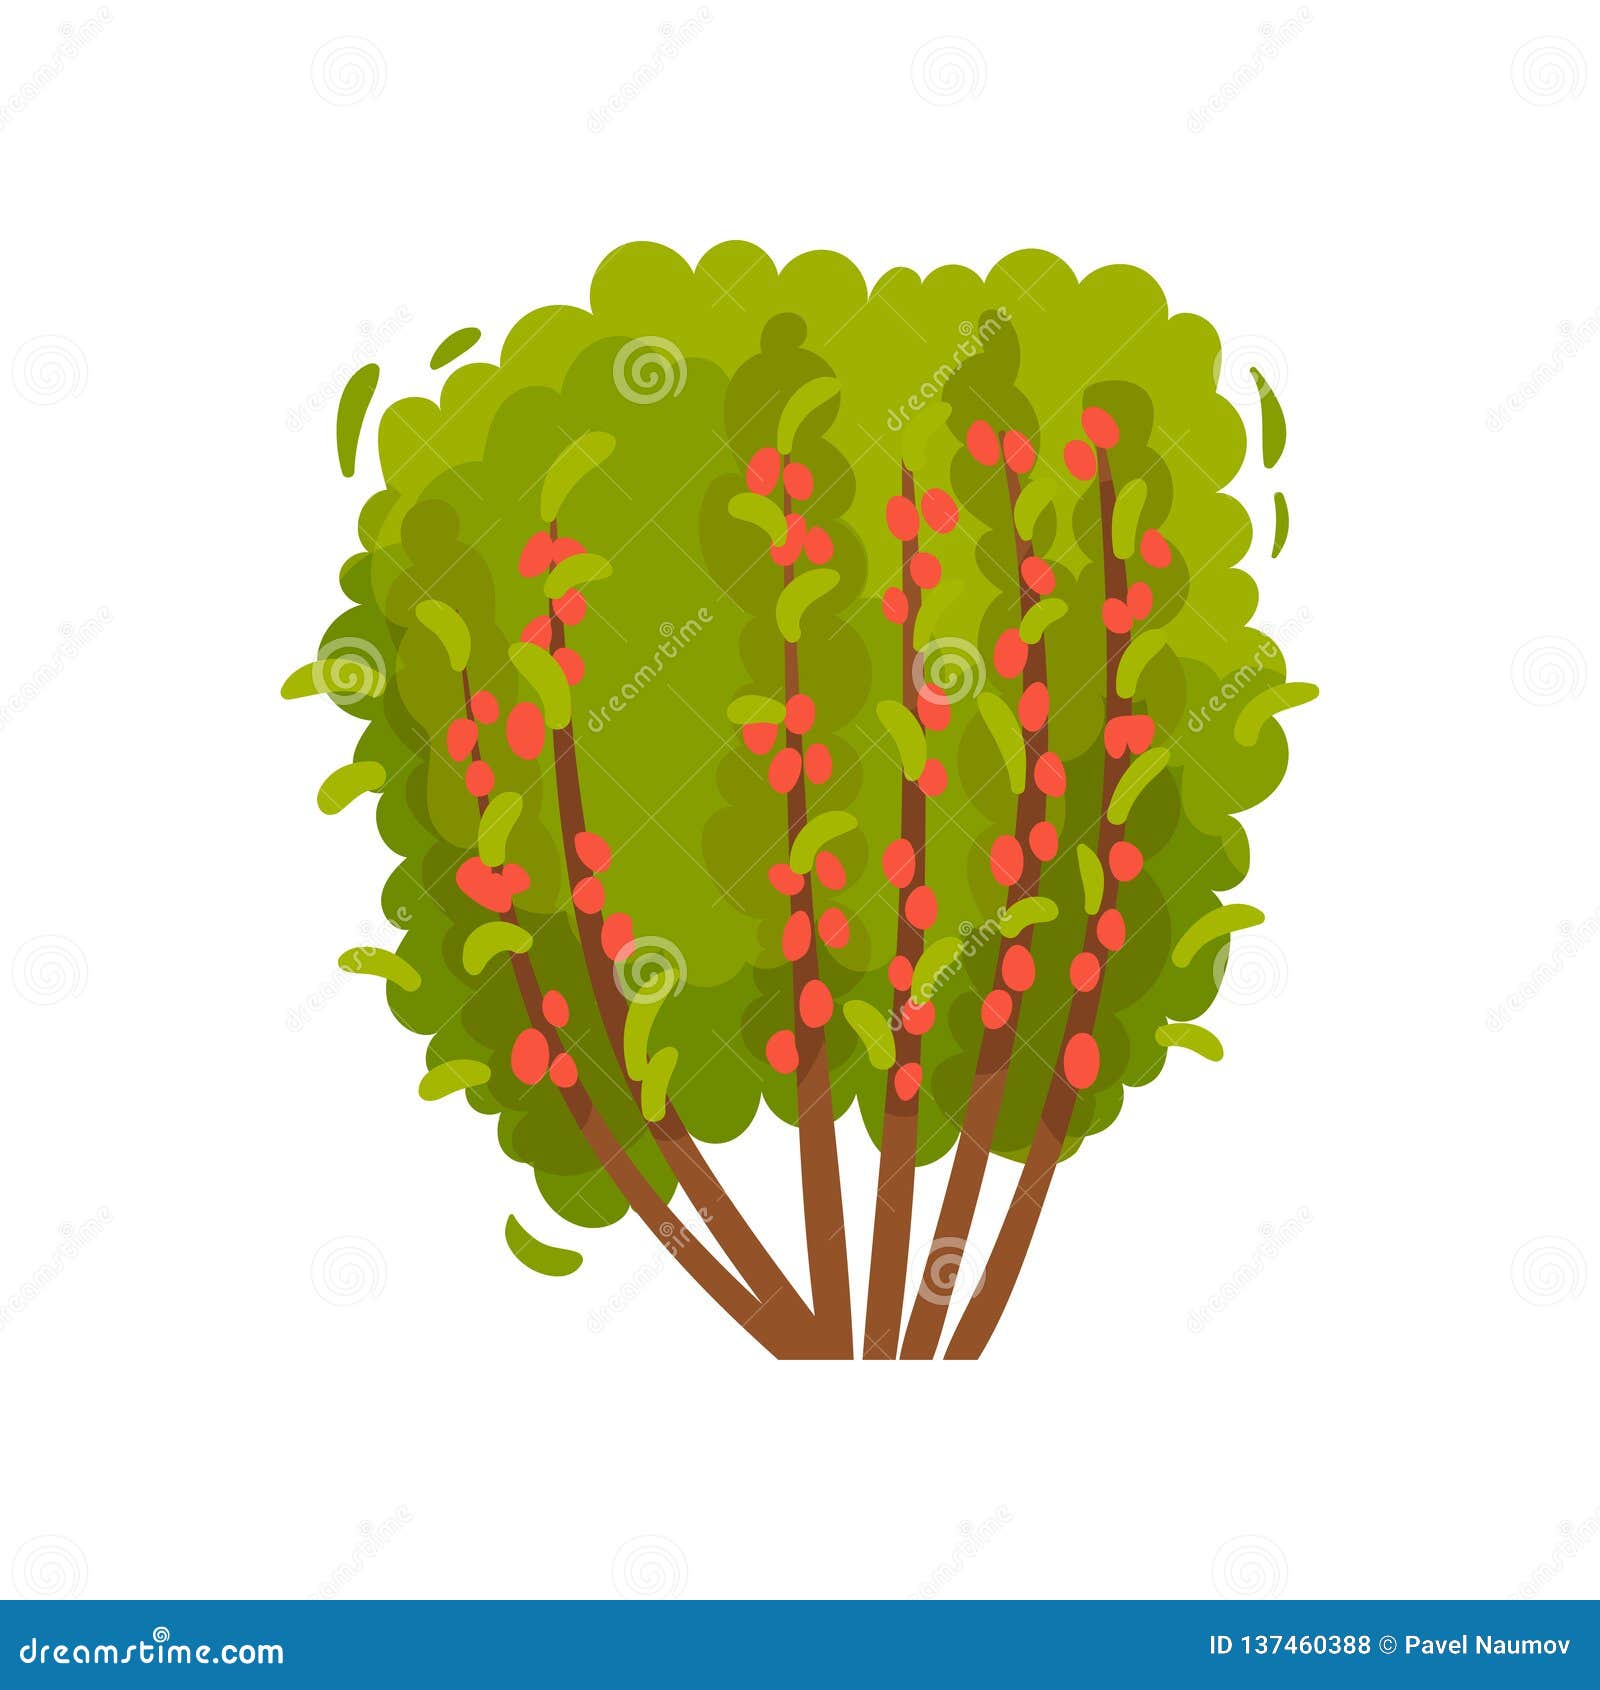 big barberry bush. shrub with ripe berries and green foliage. agricultural plant. organic product. flat  icon